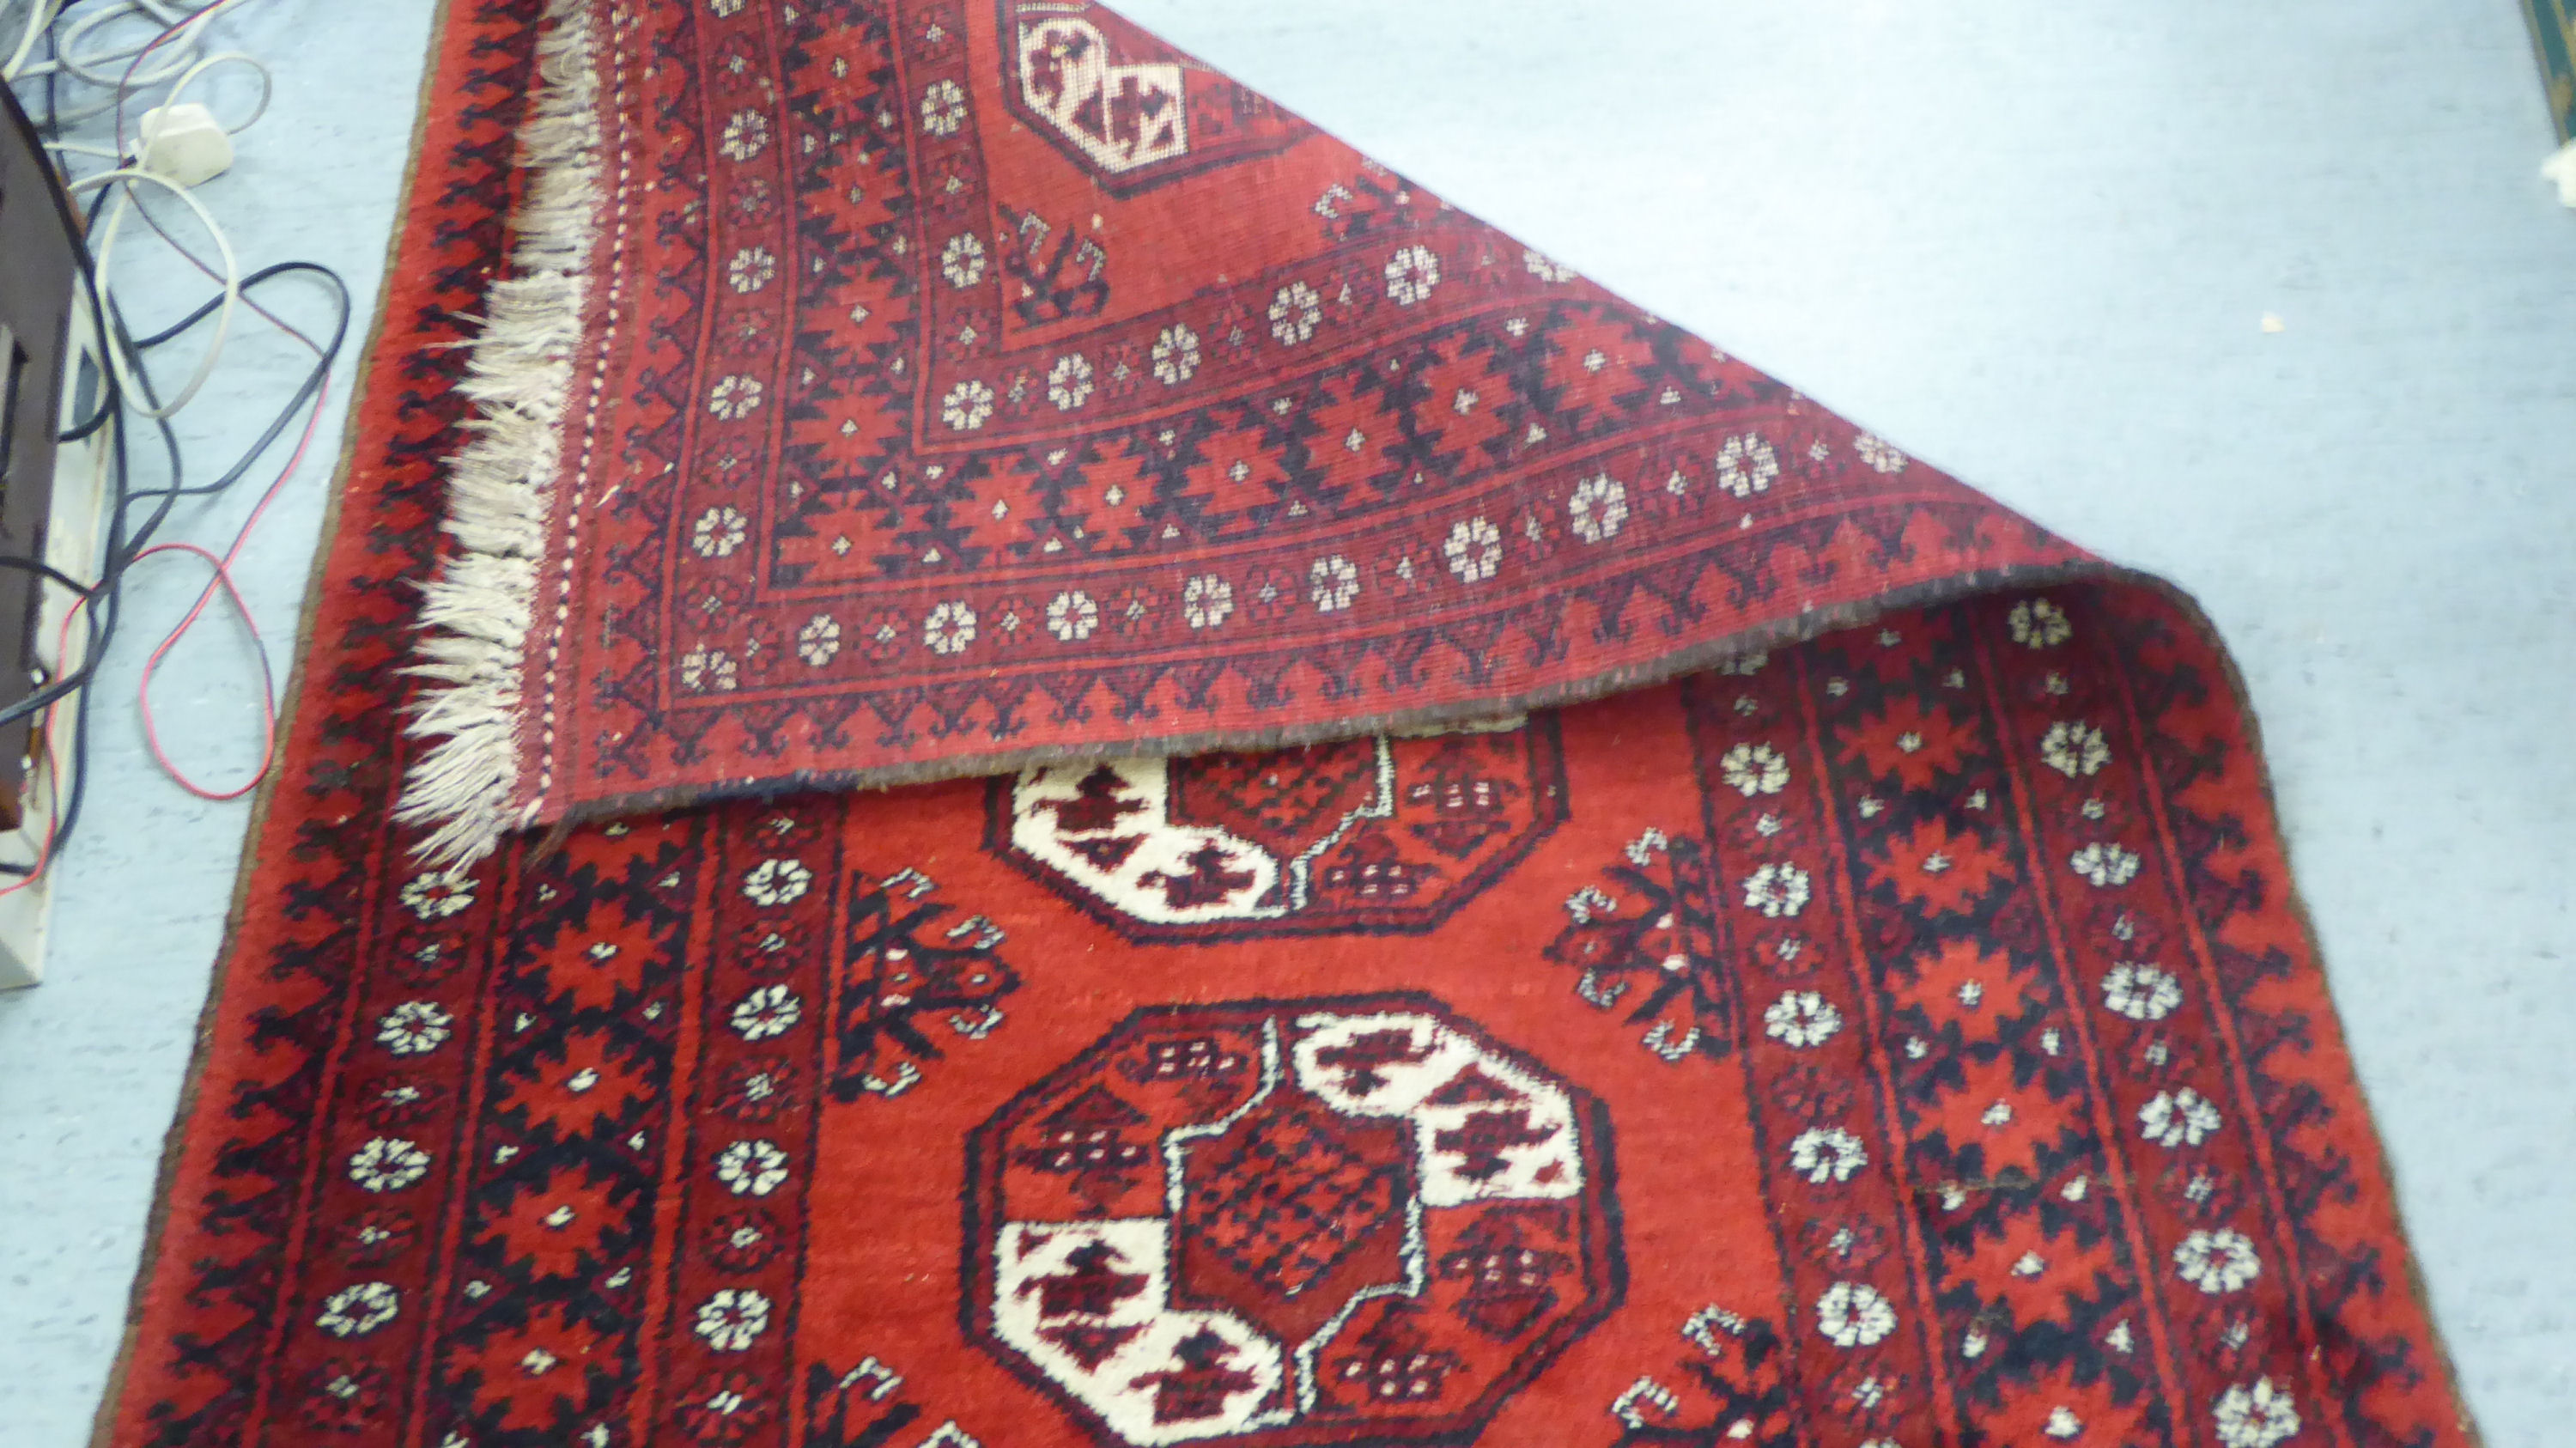 A Bokhara rug with elephant foot motifs, - Image 3 of 3